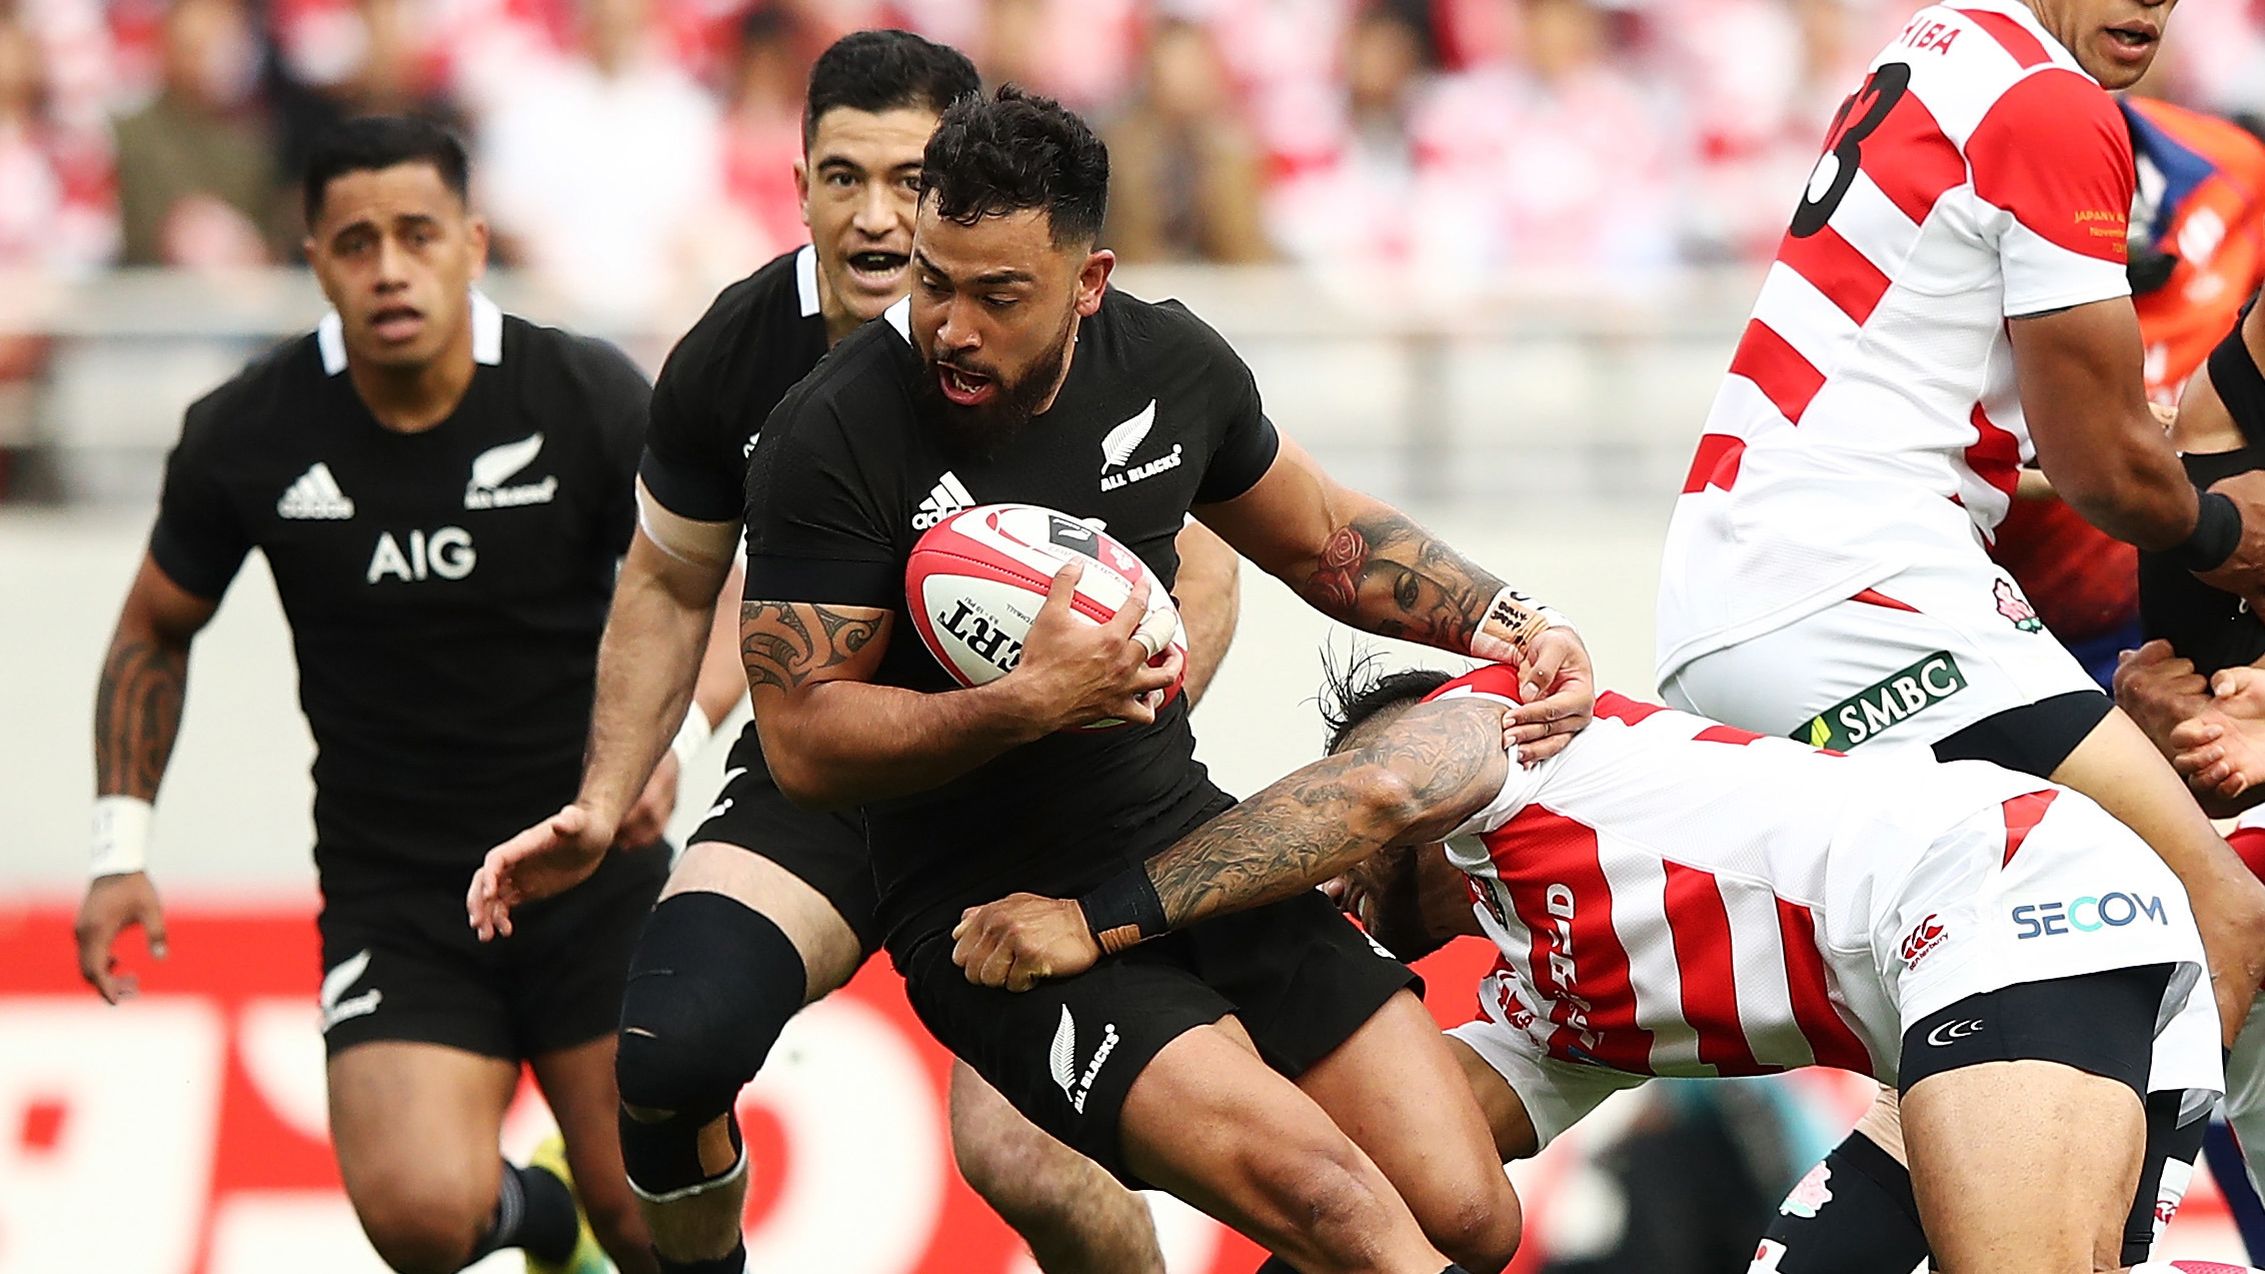 Matt Proctor (pictured with ball) made one start for the All Blacks in 2018 against Japan.